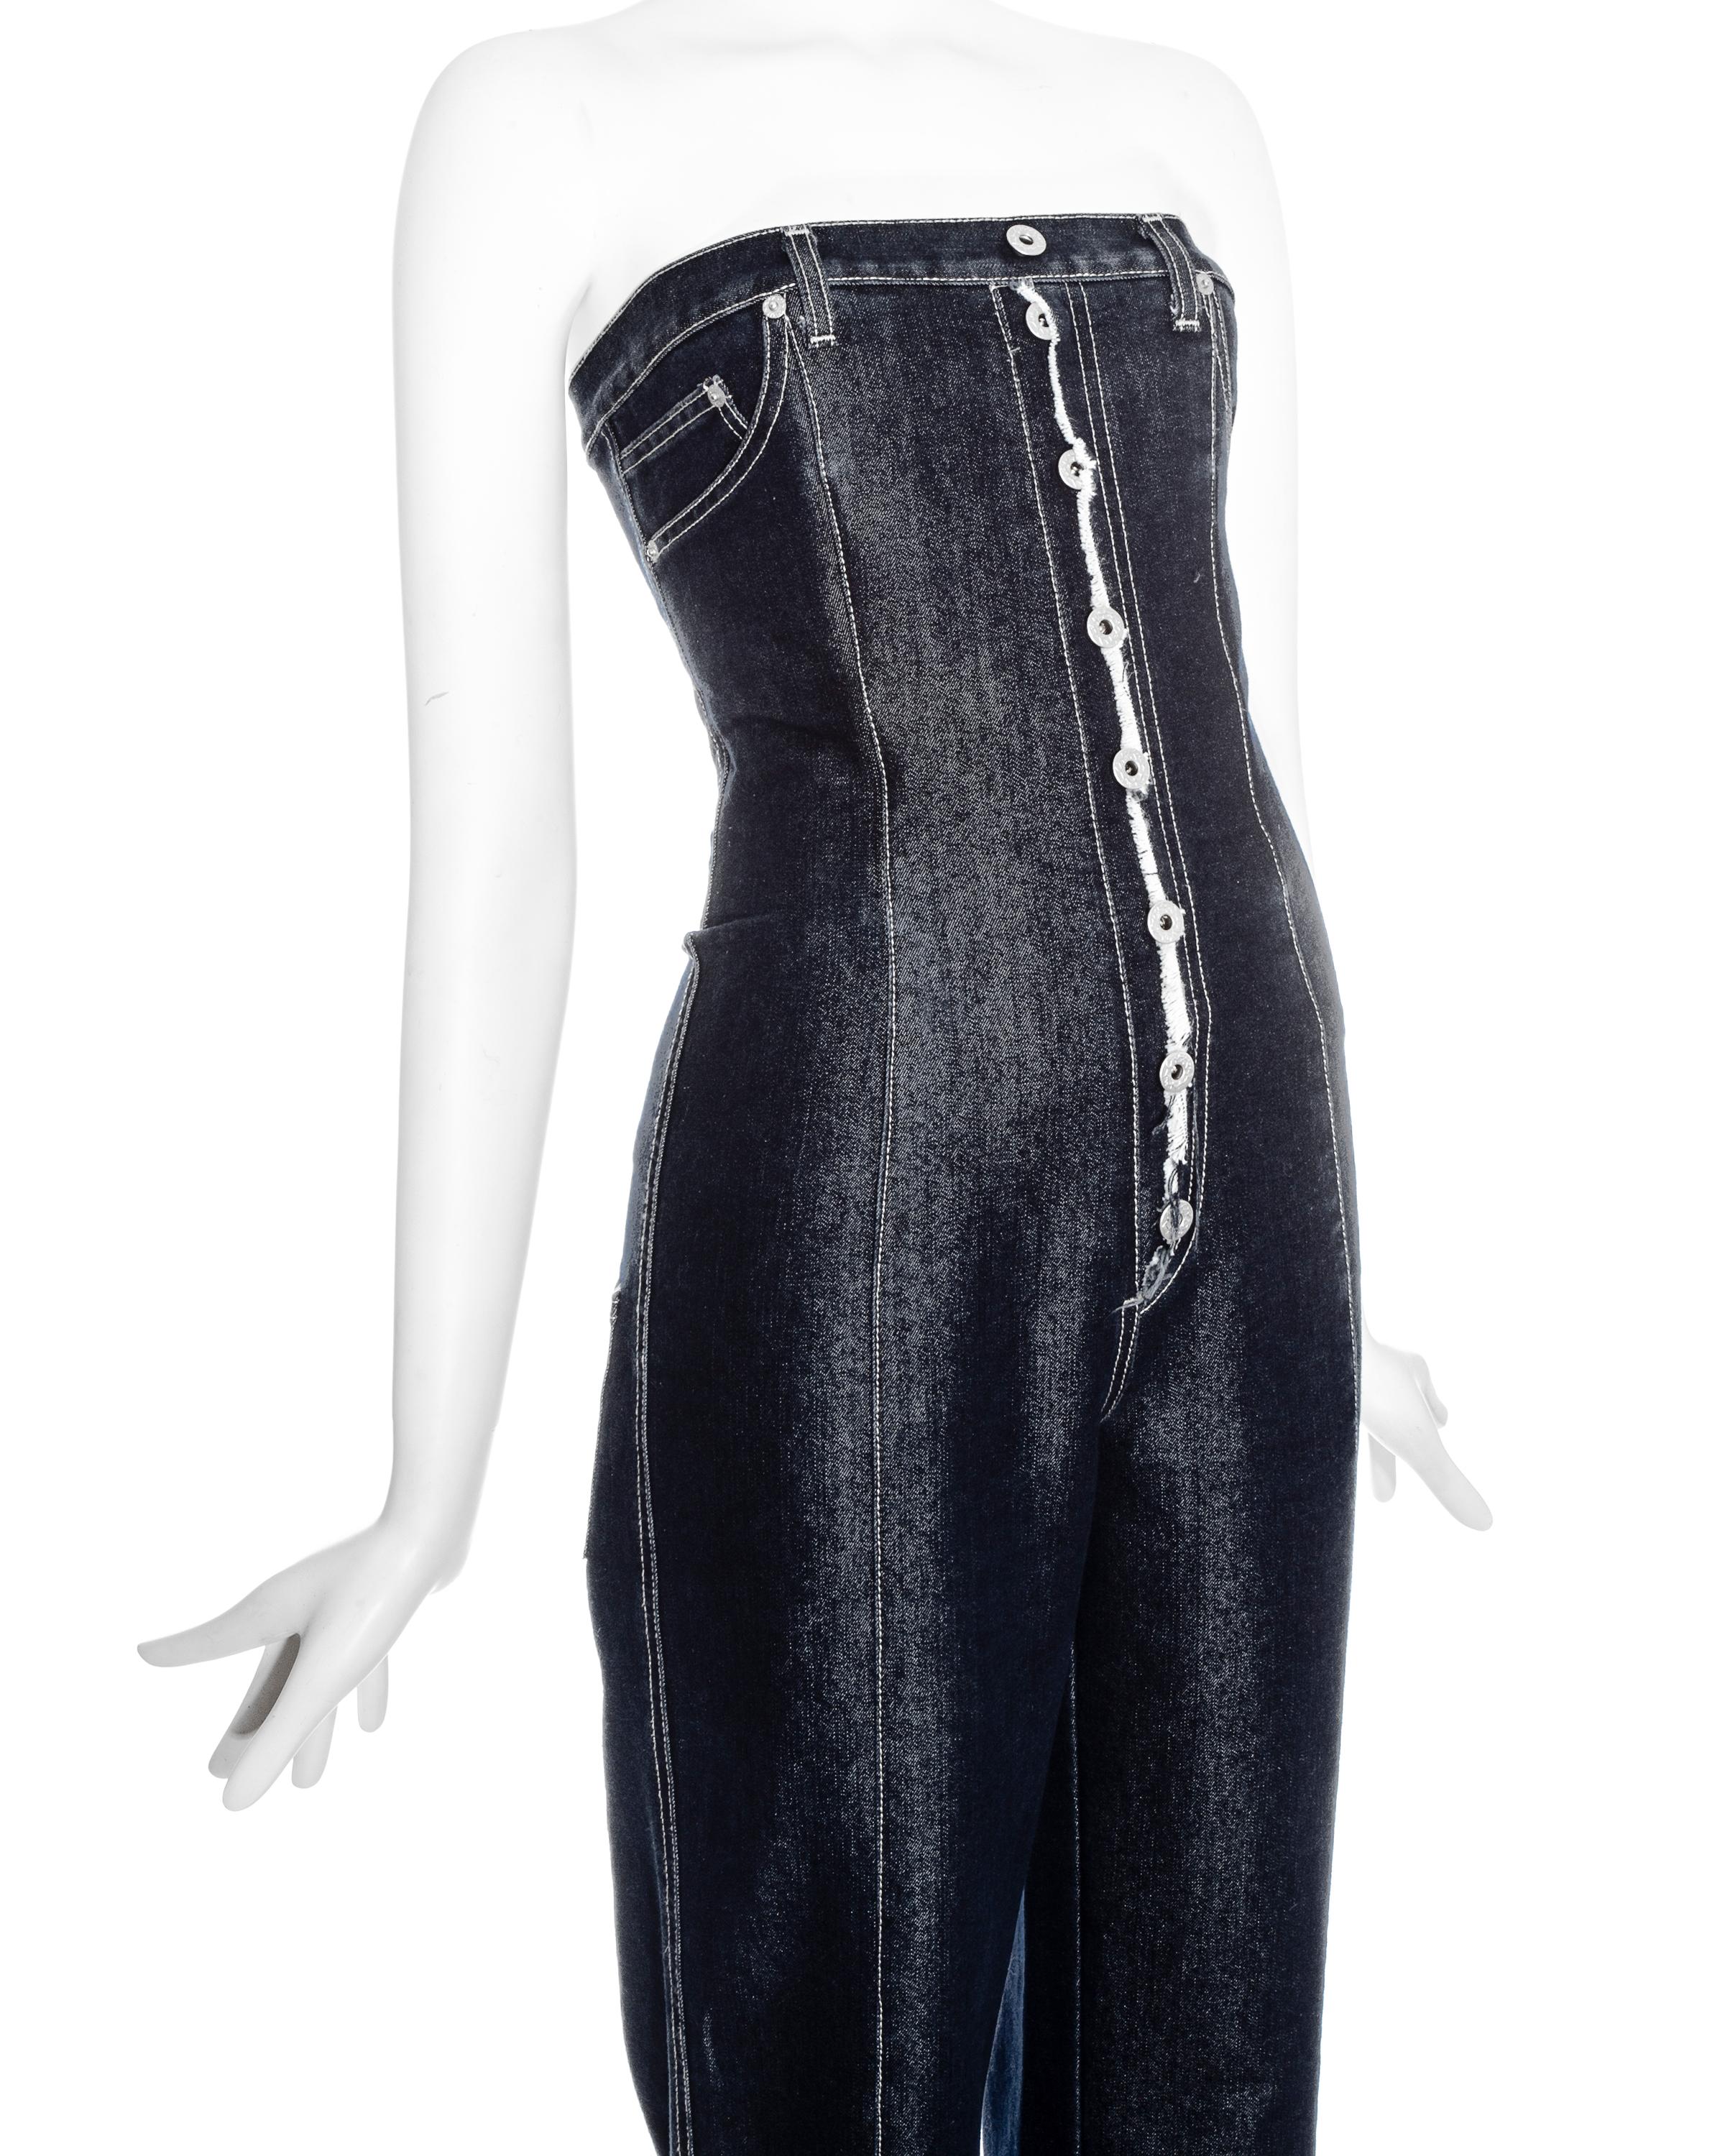 Vintage Alexander McQueen denim corset jumpsuit.
One of his earliest collections when Alexander McQueen himself was the designer and had a denim line. This piece was shown at London Fashion Week.
Corset inside.